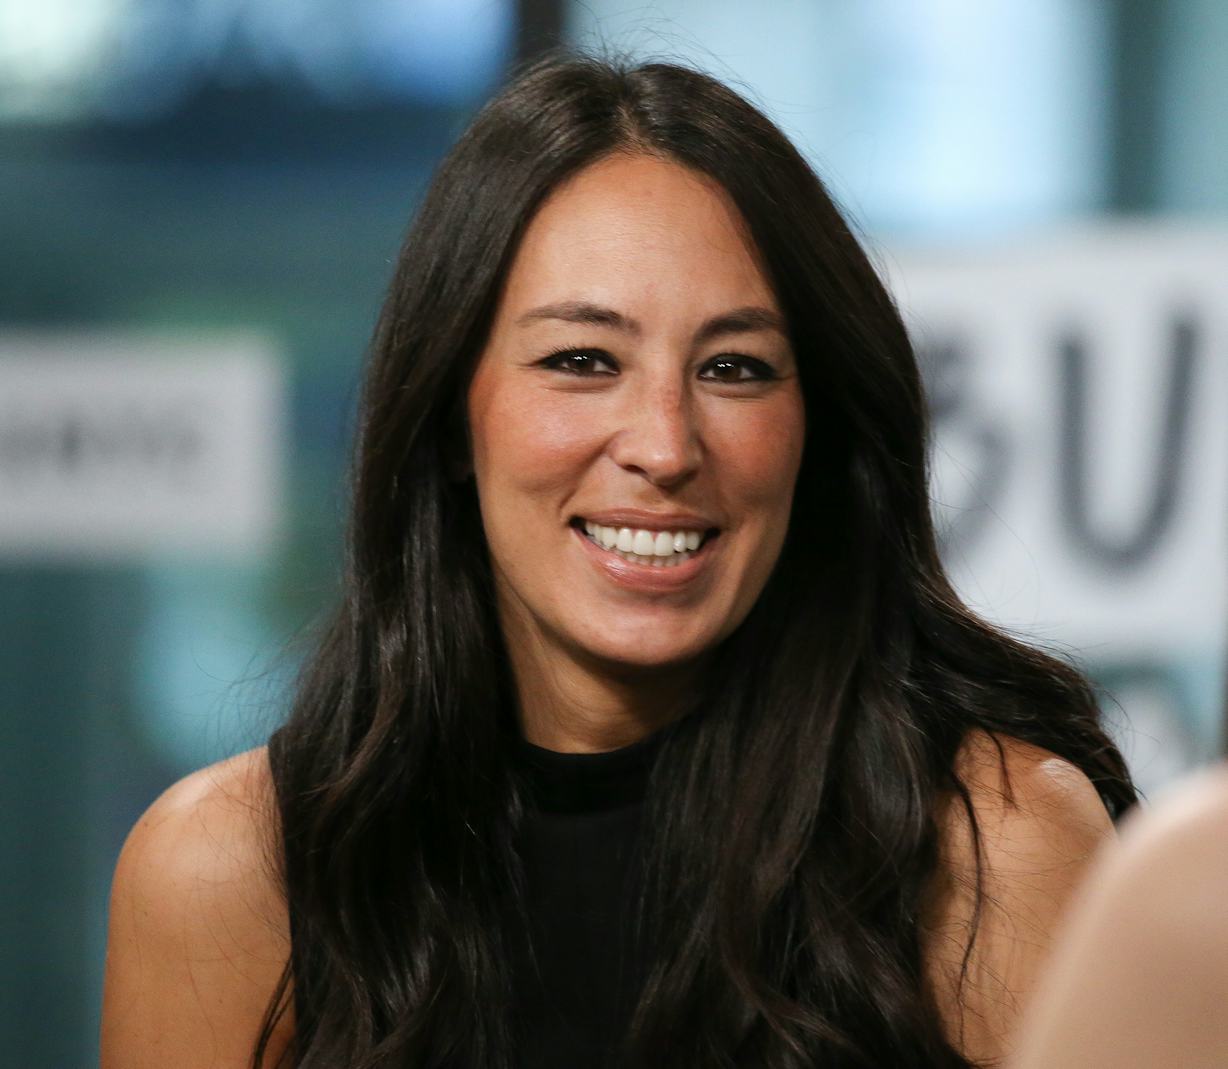 Joanna Gaines Interview About Her New Children’s Book